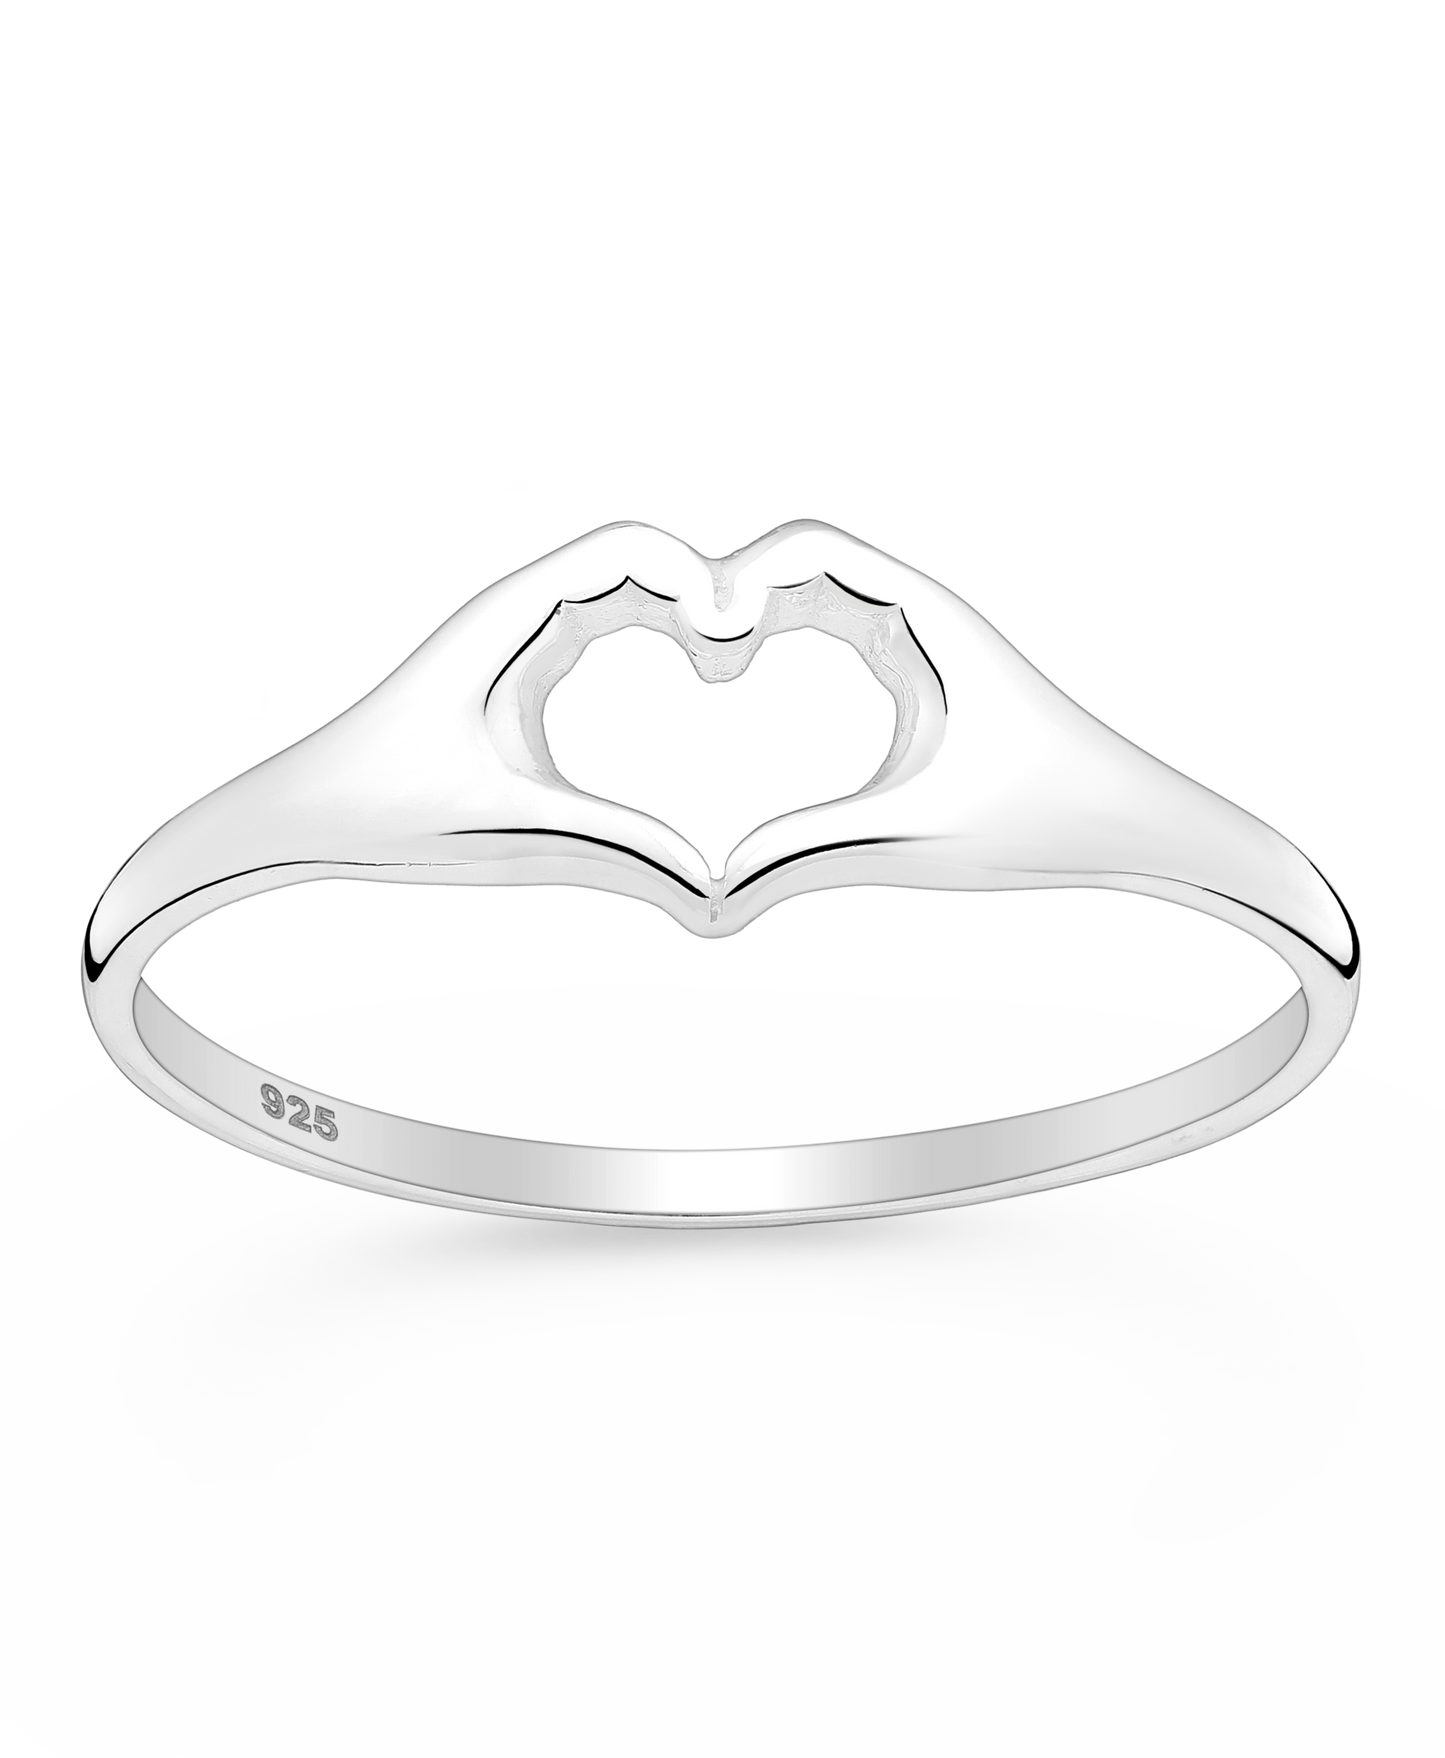 Sparkle By Princess Andre: Sterling Silver Sculptured Heart Hands Ring